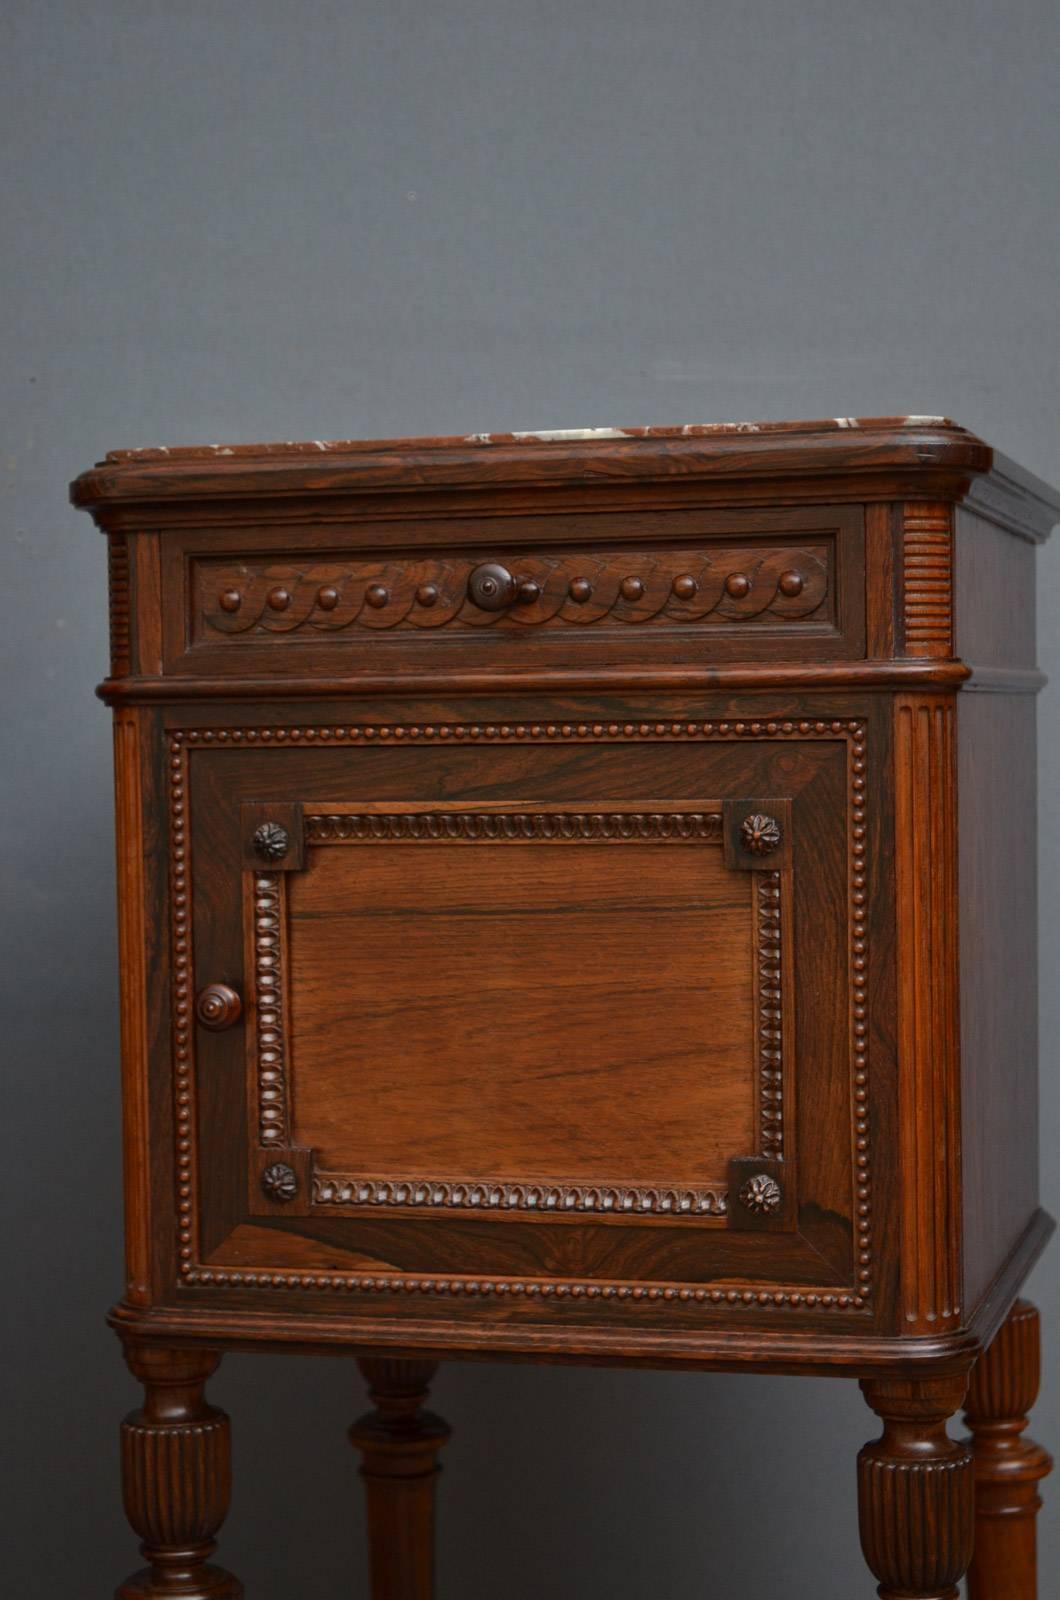 Victorian Pair of Superb Quality Rosewood Bedside Cabinets by Maison Krieger, Paris